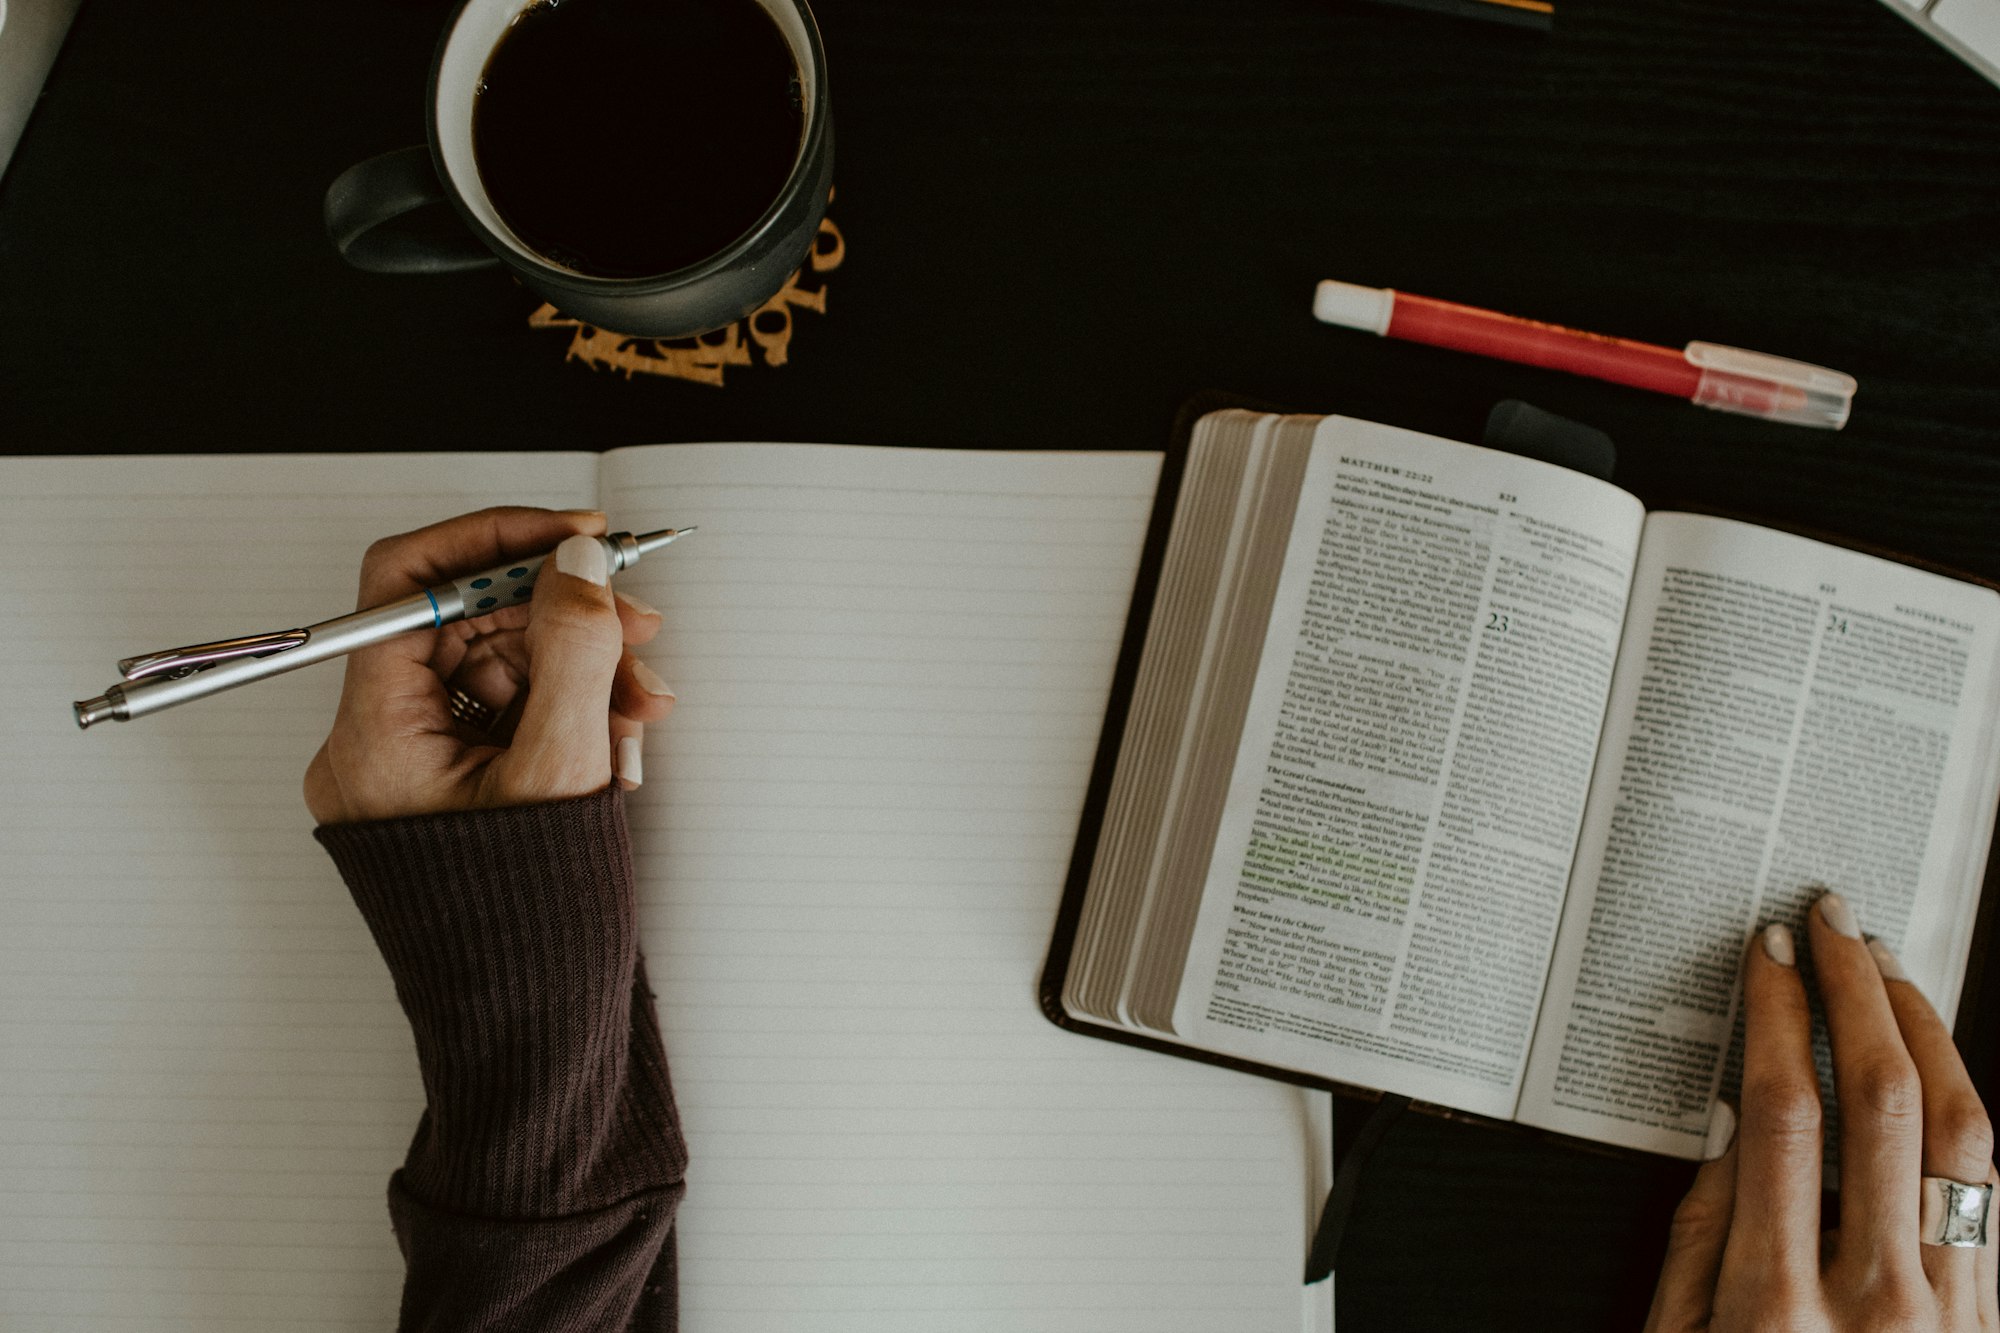 How They Taught Me To Study The Bible in Bible College